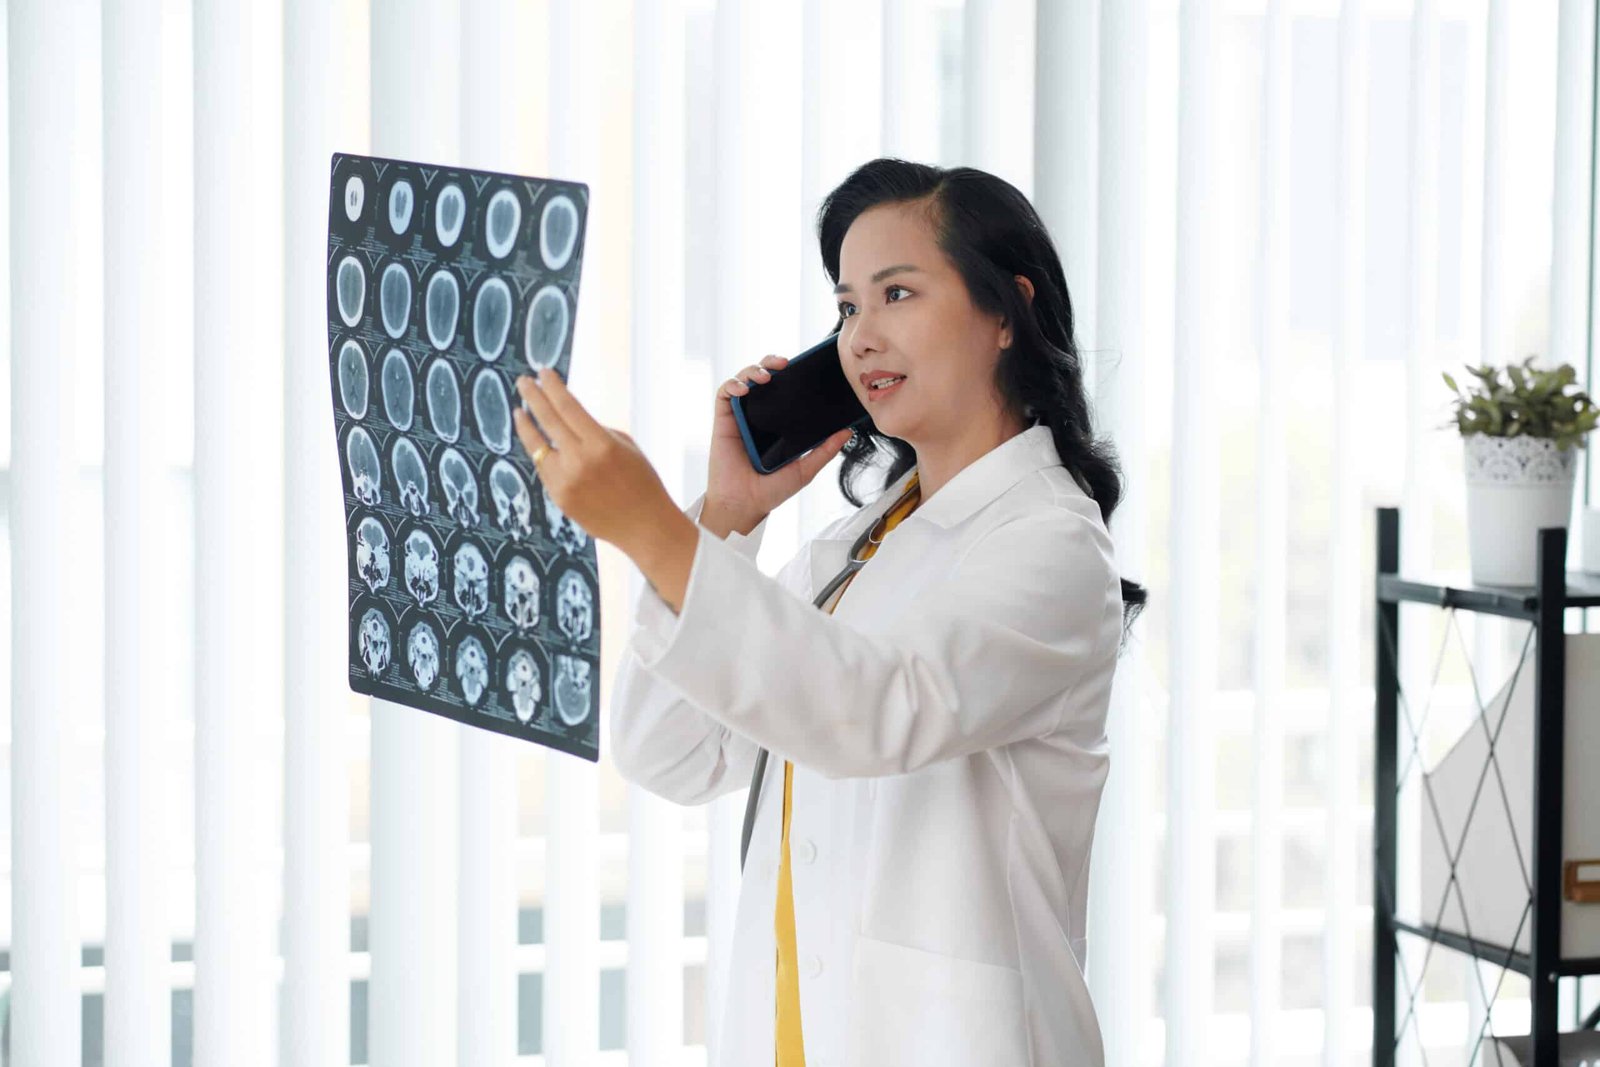 Radiologists will not be replaced by the AI